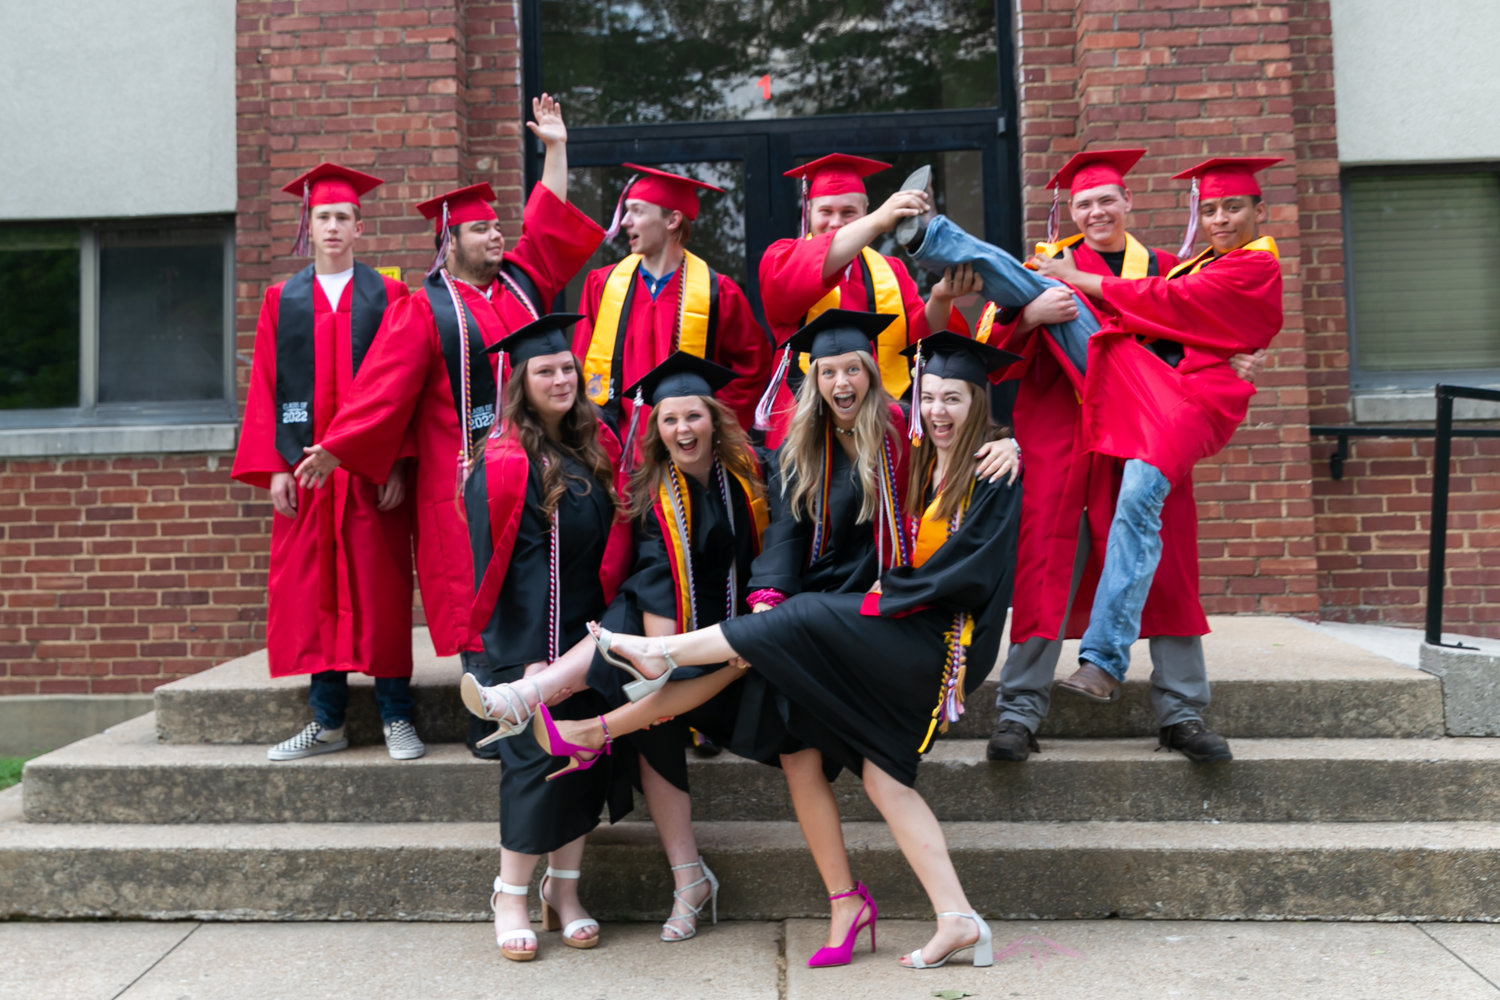 The Niangua senior class of 2022 was all smiles and laughter for this silly group shot.